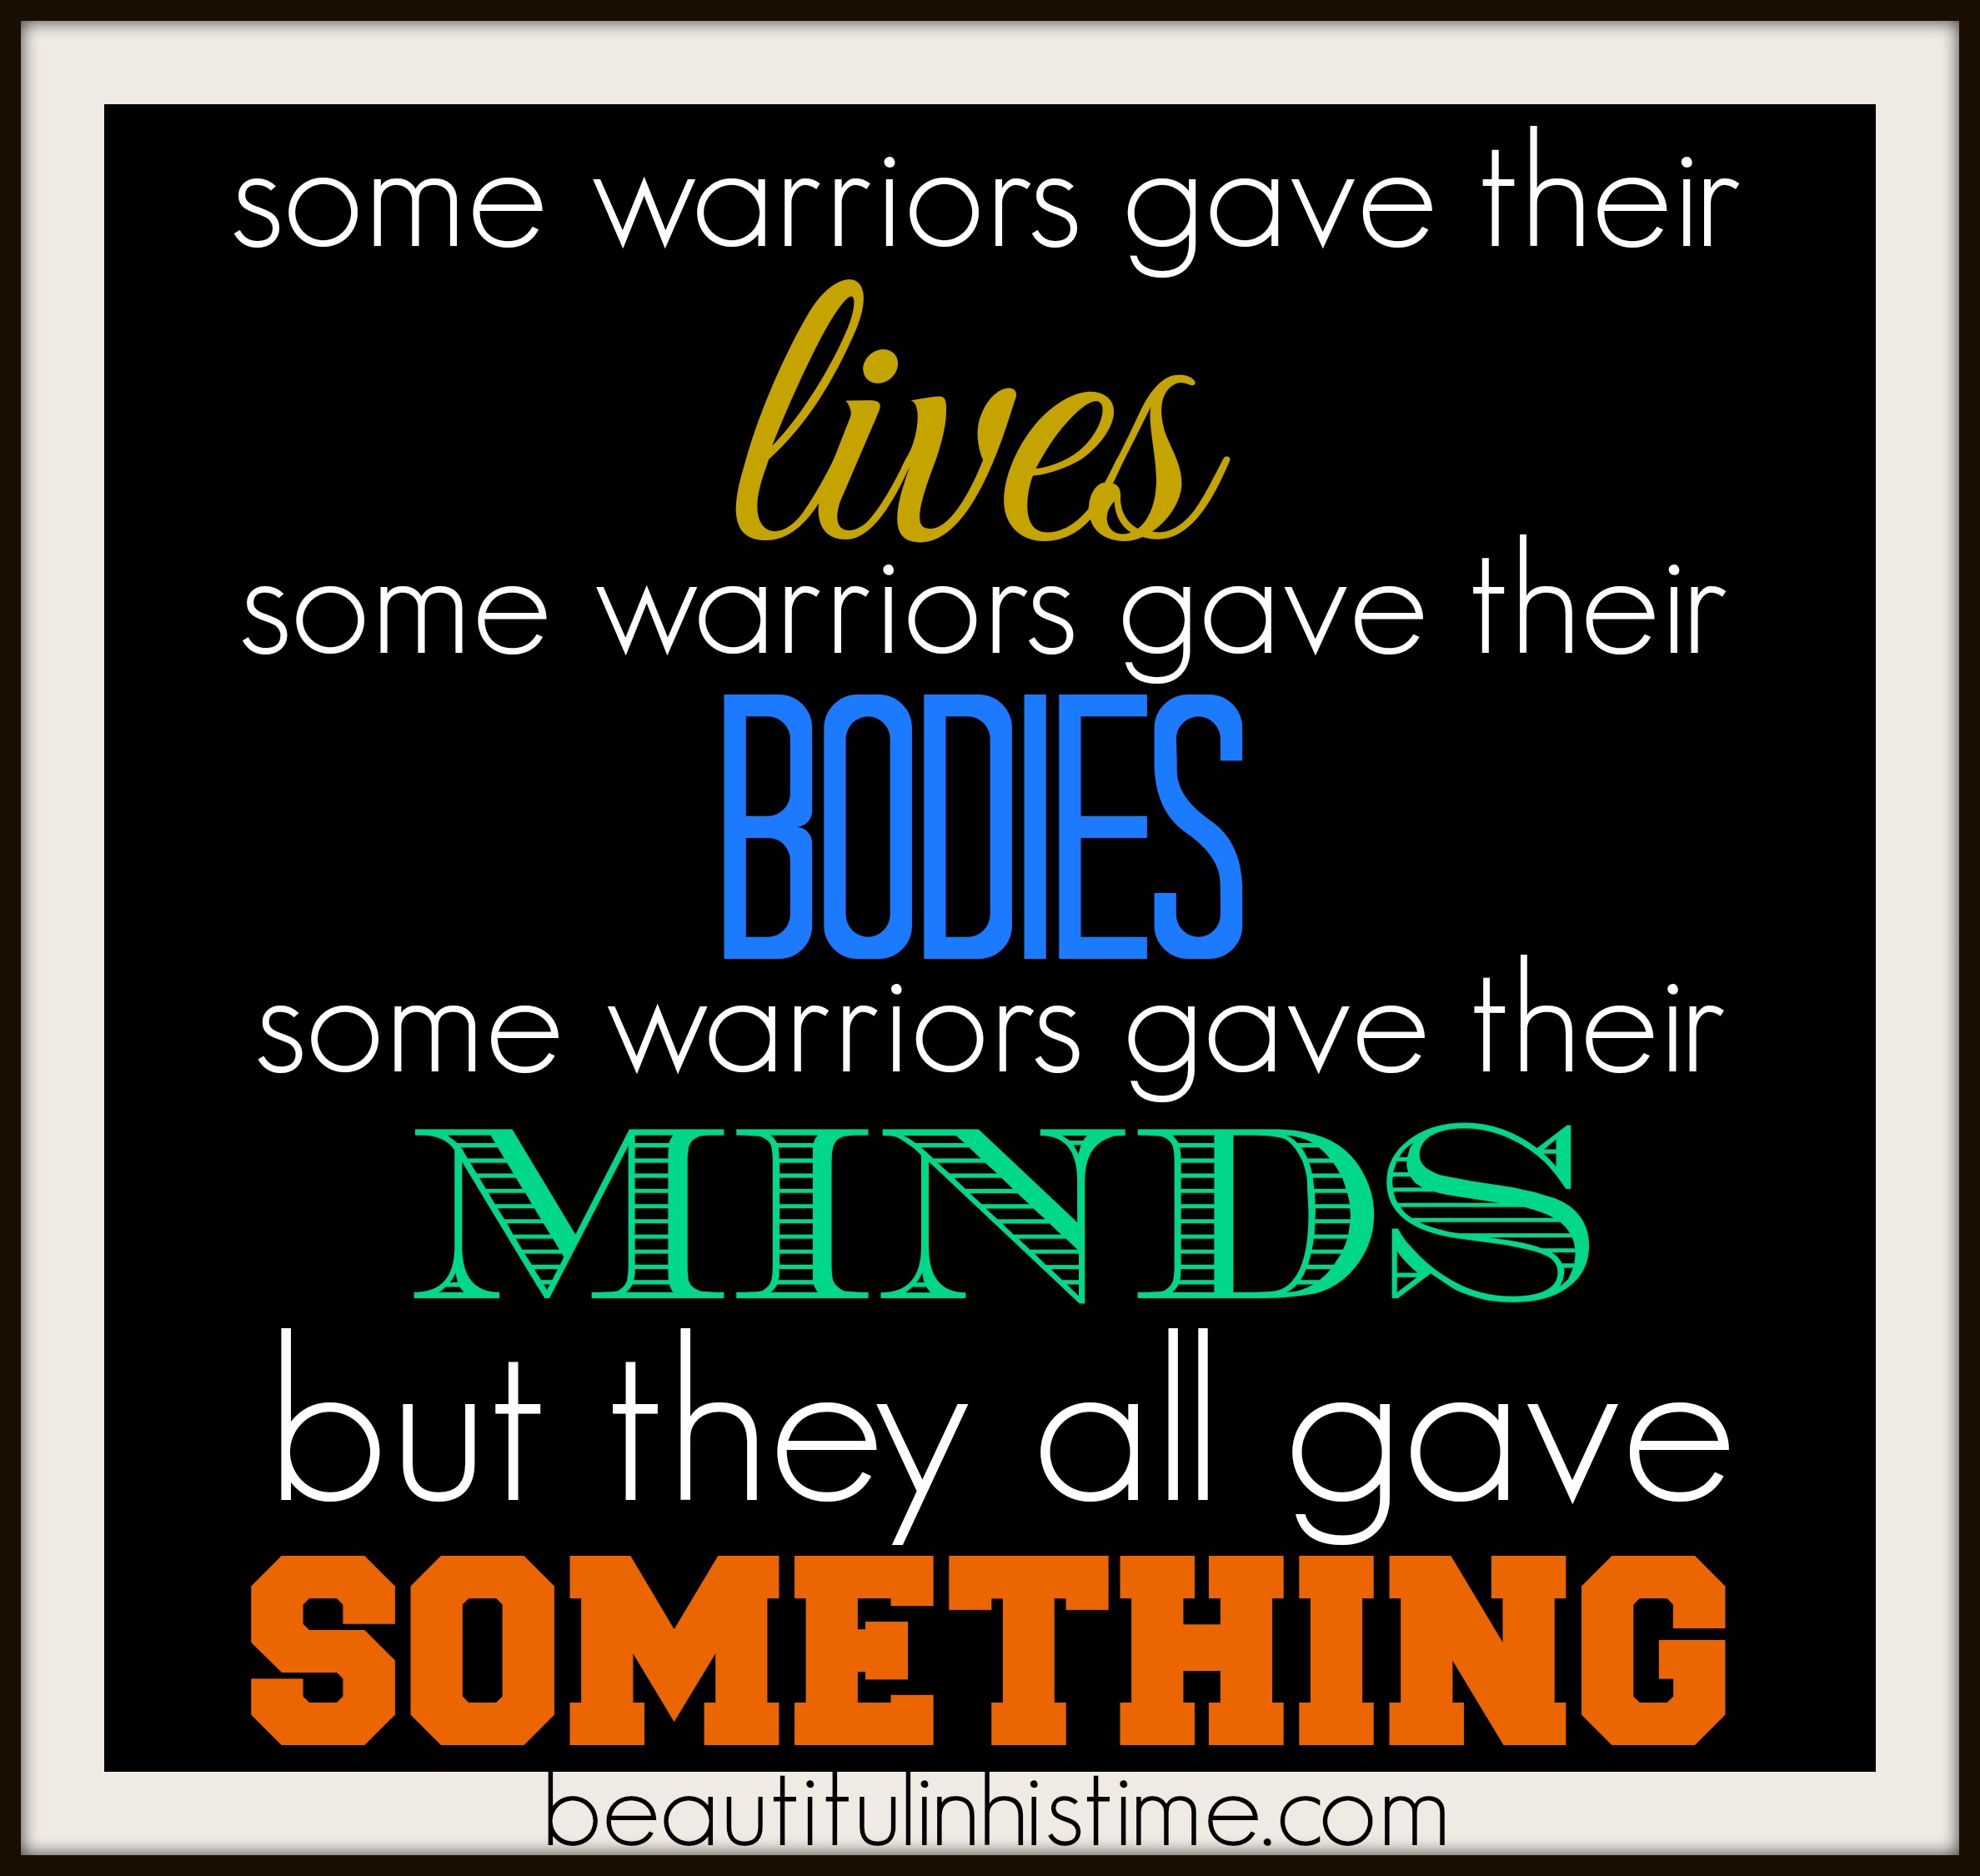 they all gave something #woundedwarriors #ptsd #combatstress #veterans #military #milpouse #deployment